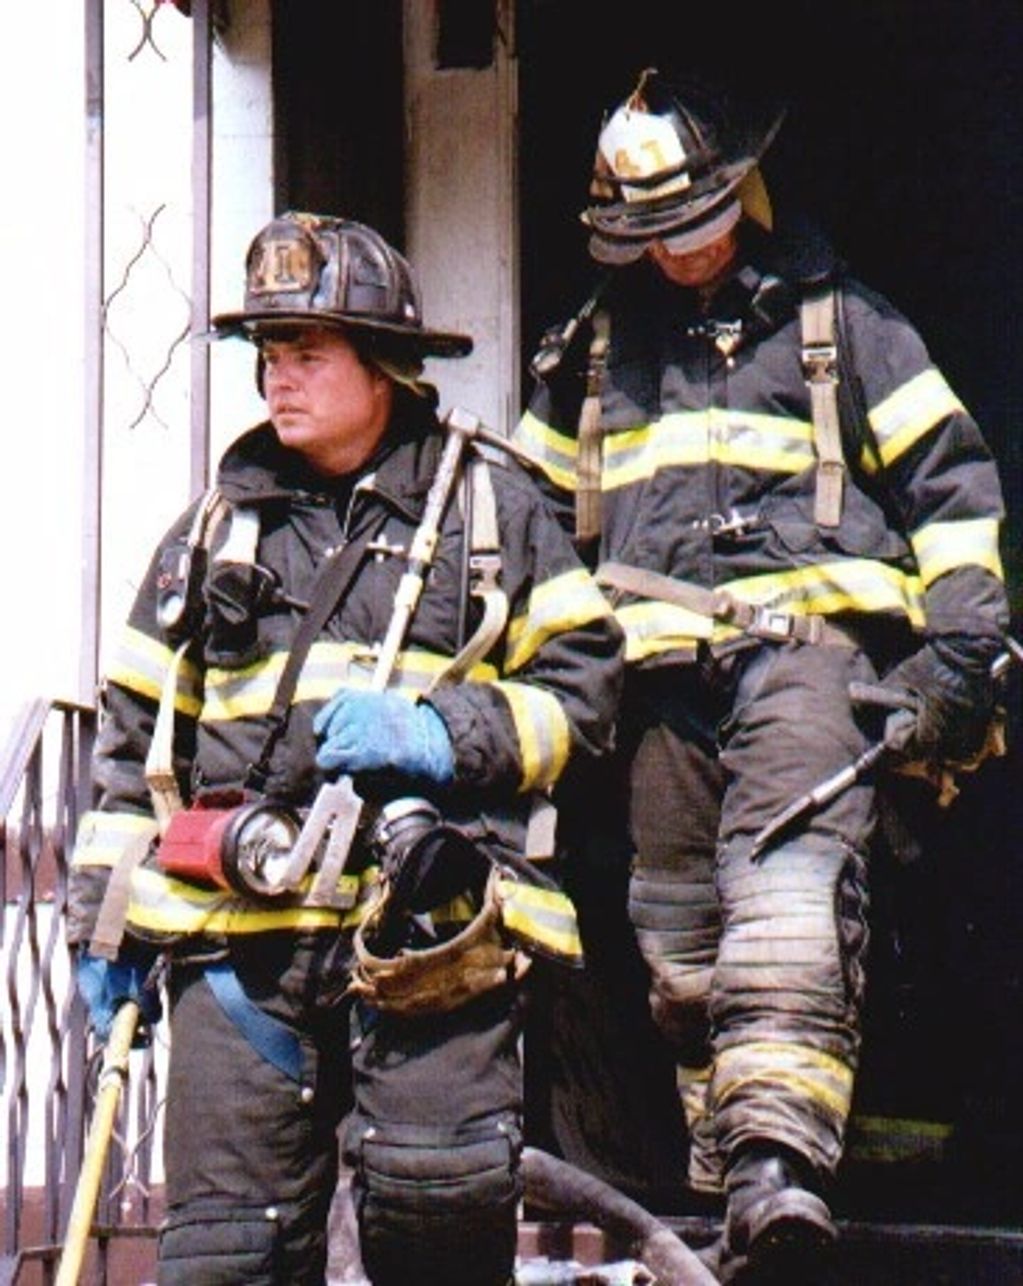 Ed Walsh followed by Lieutenant Mike Healey after a fire in South Bronx